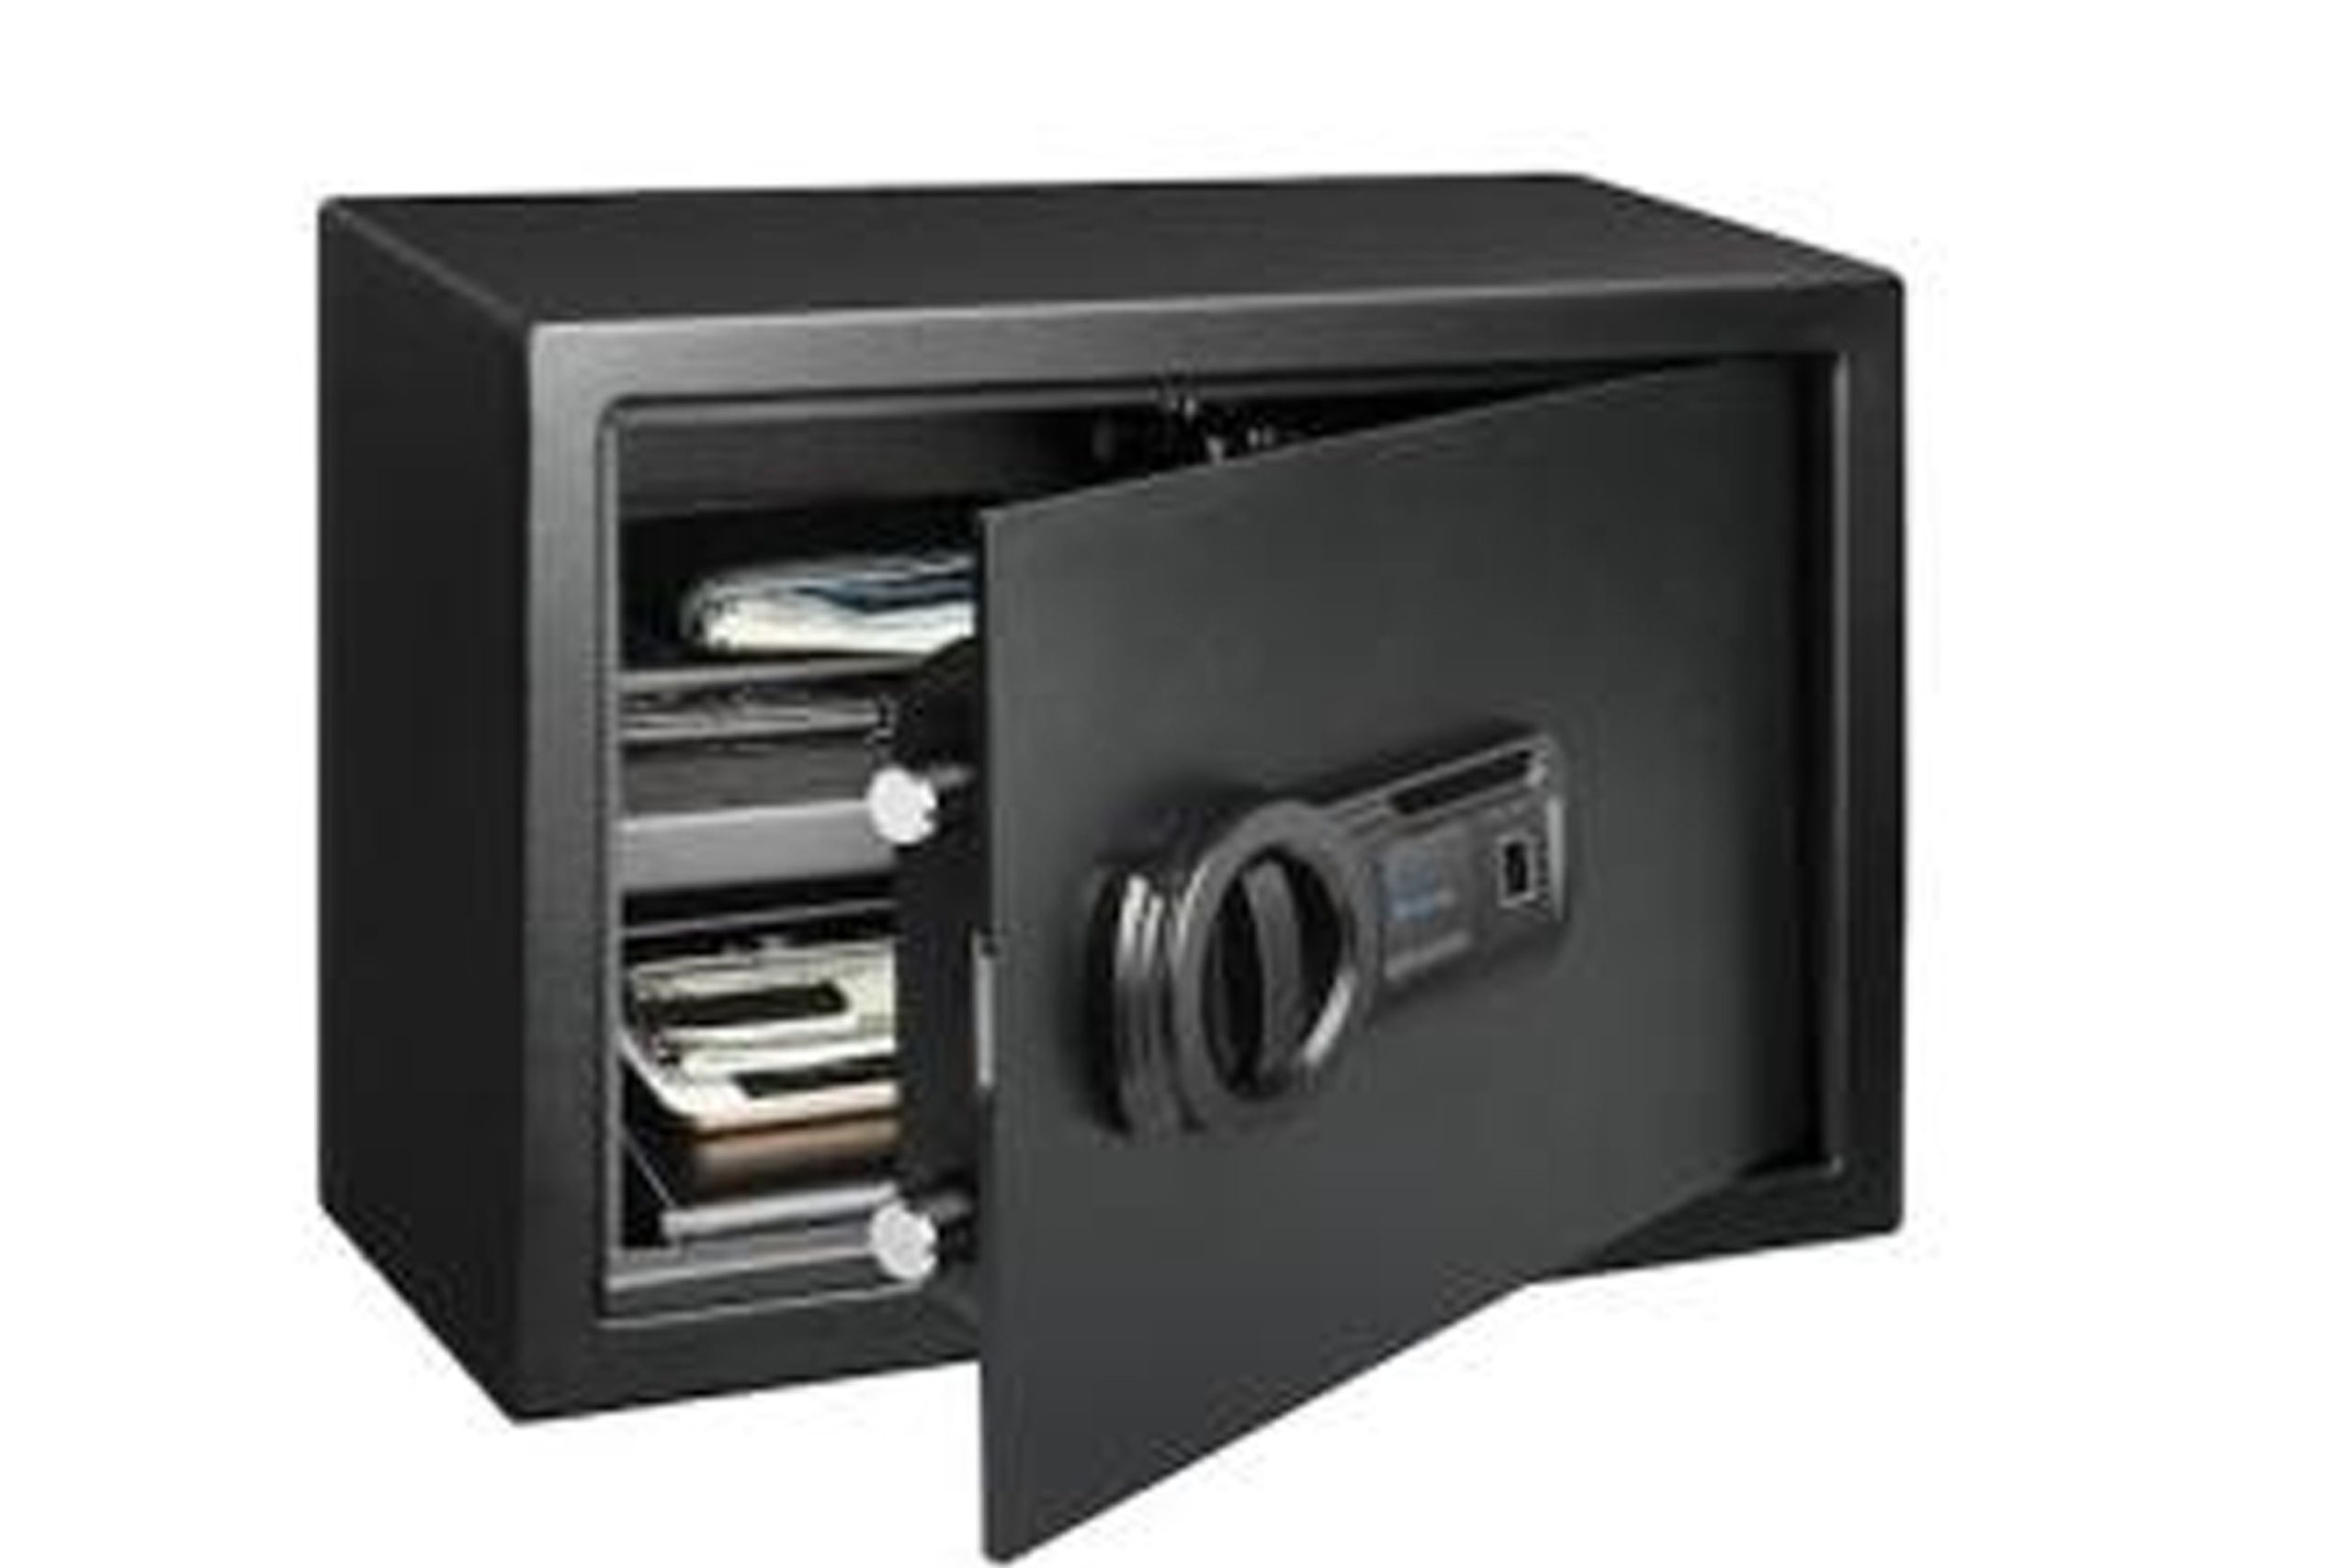 Recall Issued for 60,000 Gun Safes Following Fatal Shooting Incident